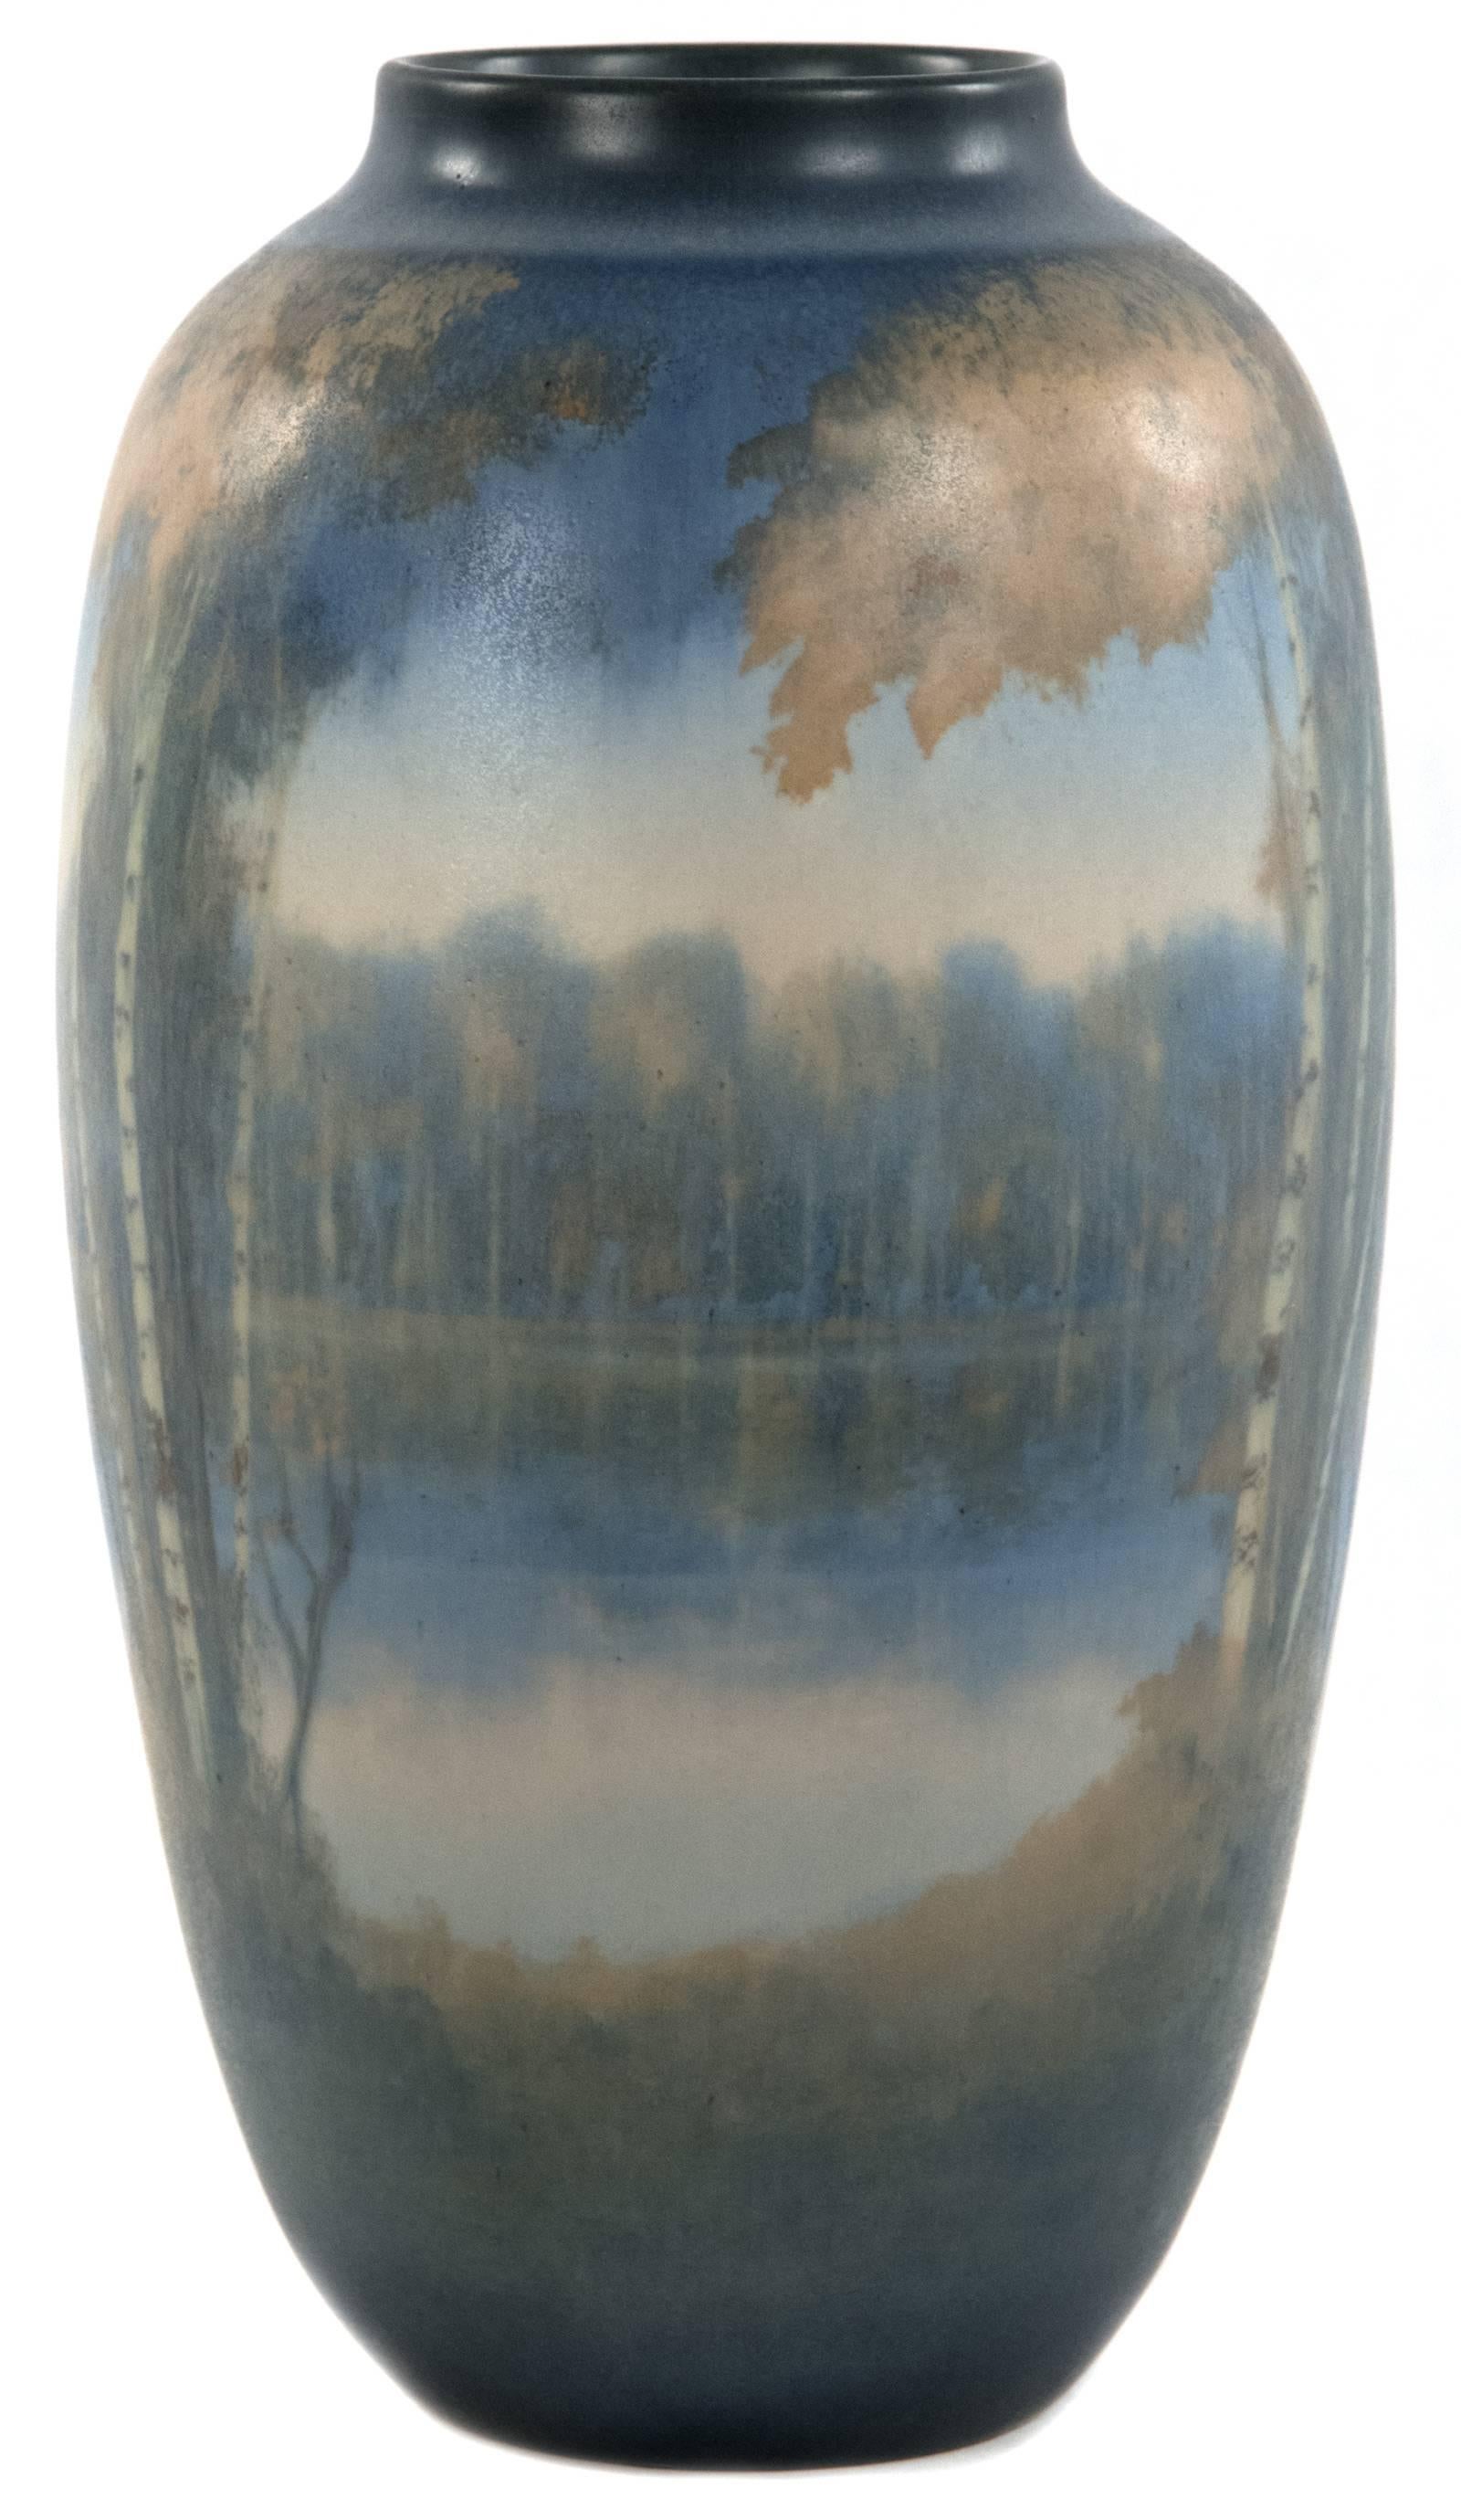 A tree-lined shoreline is reflected in a calm river in this atmospheric landscape that is softly illustrated in a neutral autumnal palette of blue, orange and brown glazes on this Rookwood Pottery vase of ovoid form dating from the mid-20th century.